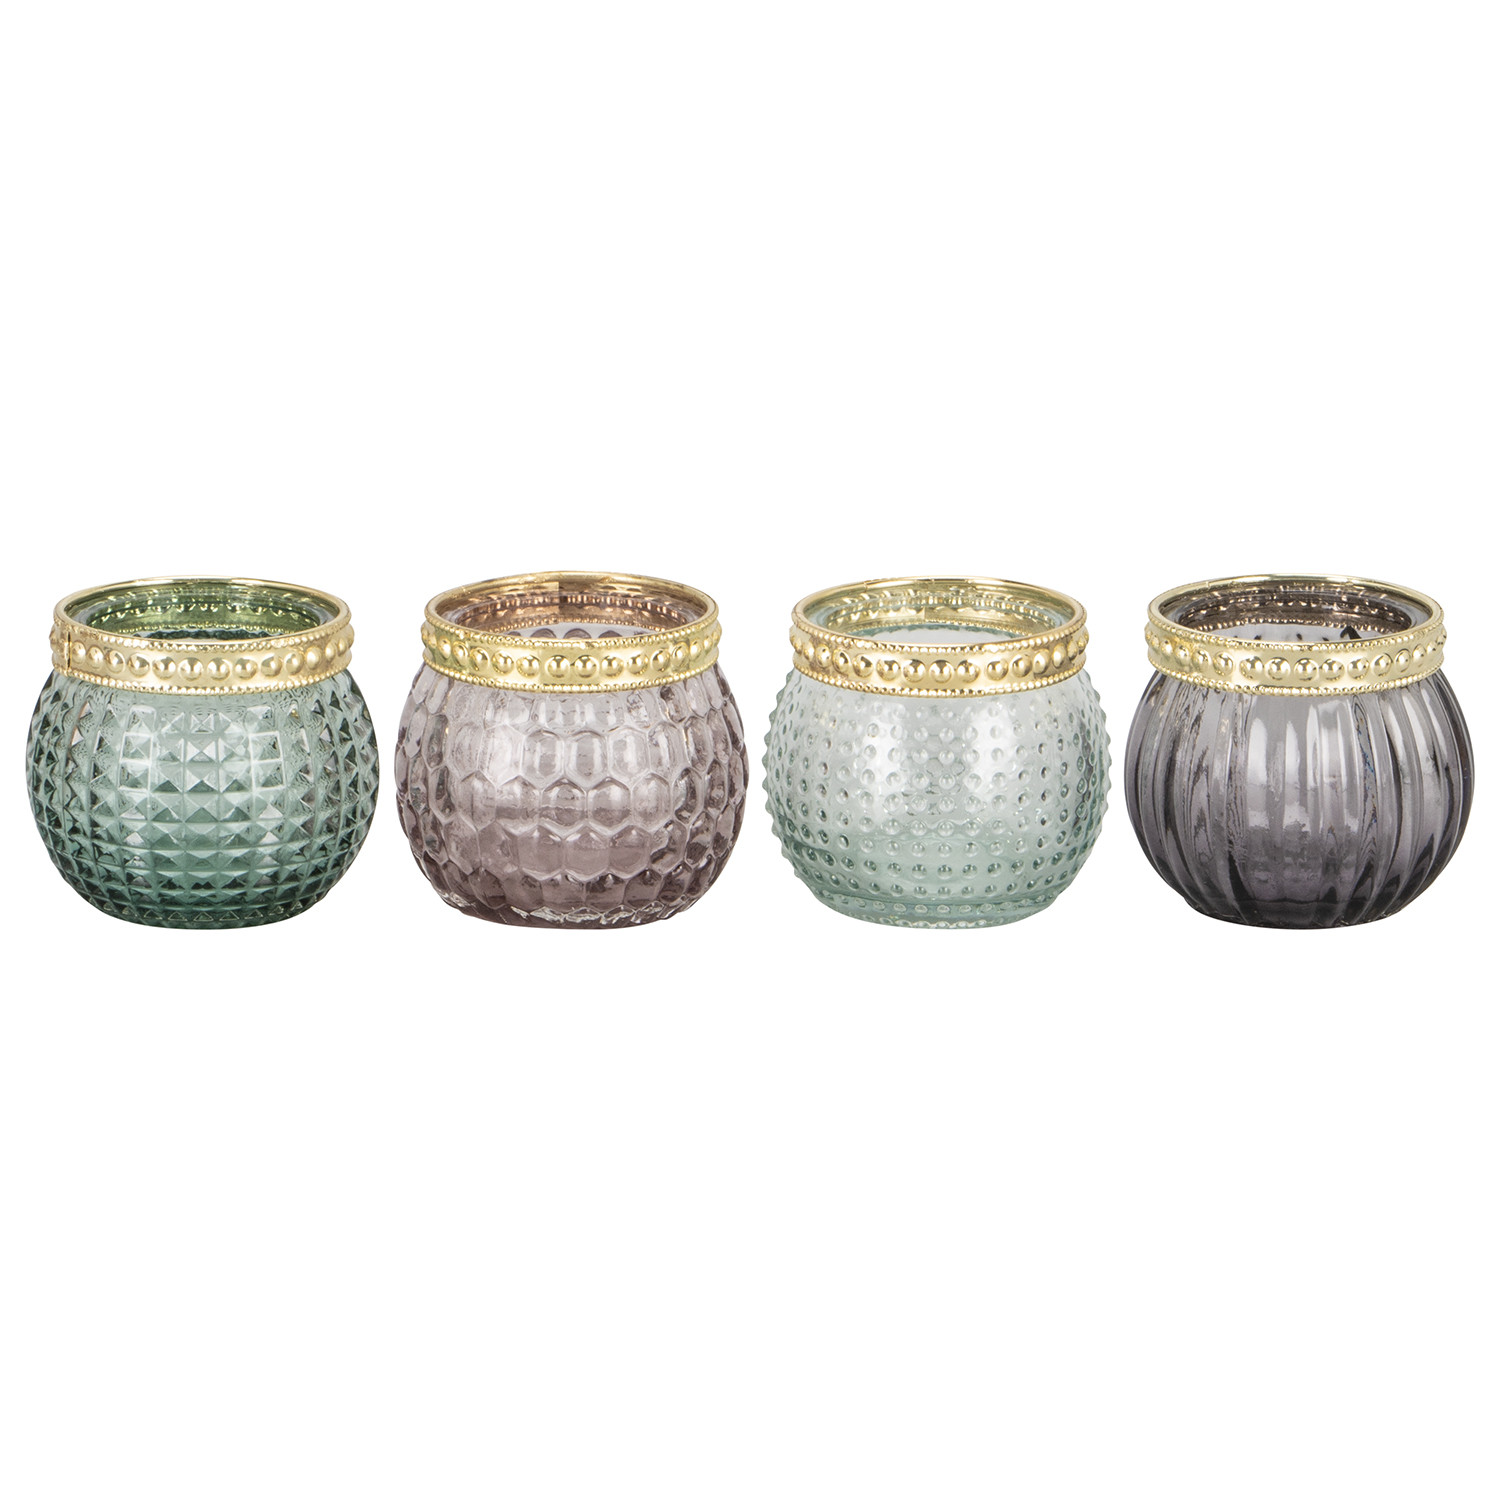 Pure Decor Jewel Candle Holders 4 Pack Image 1